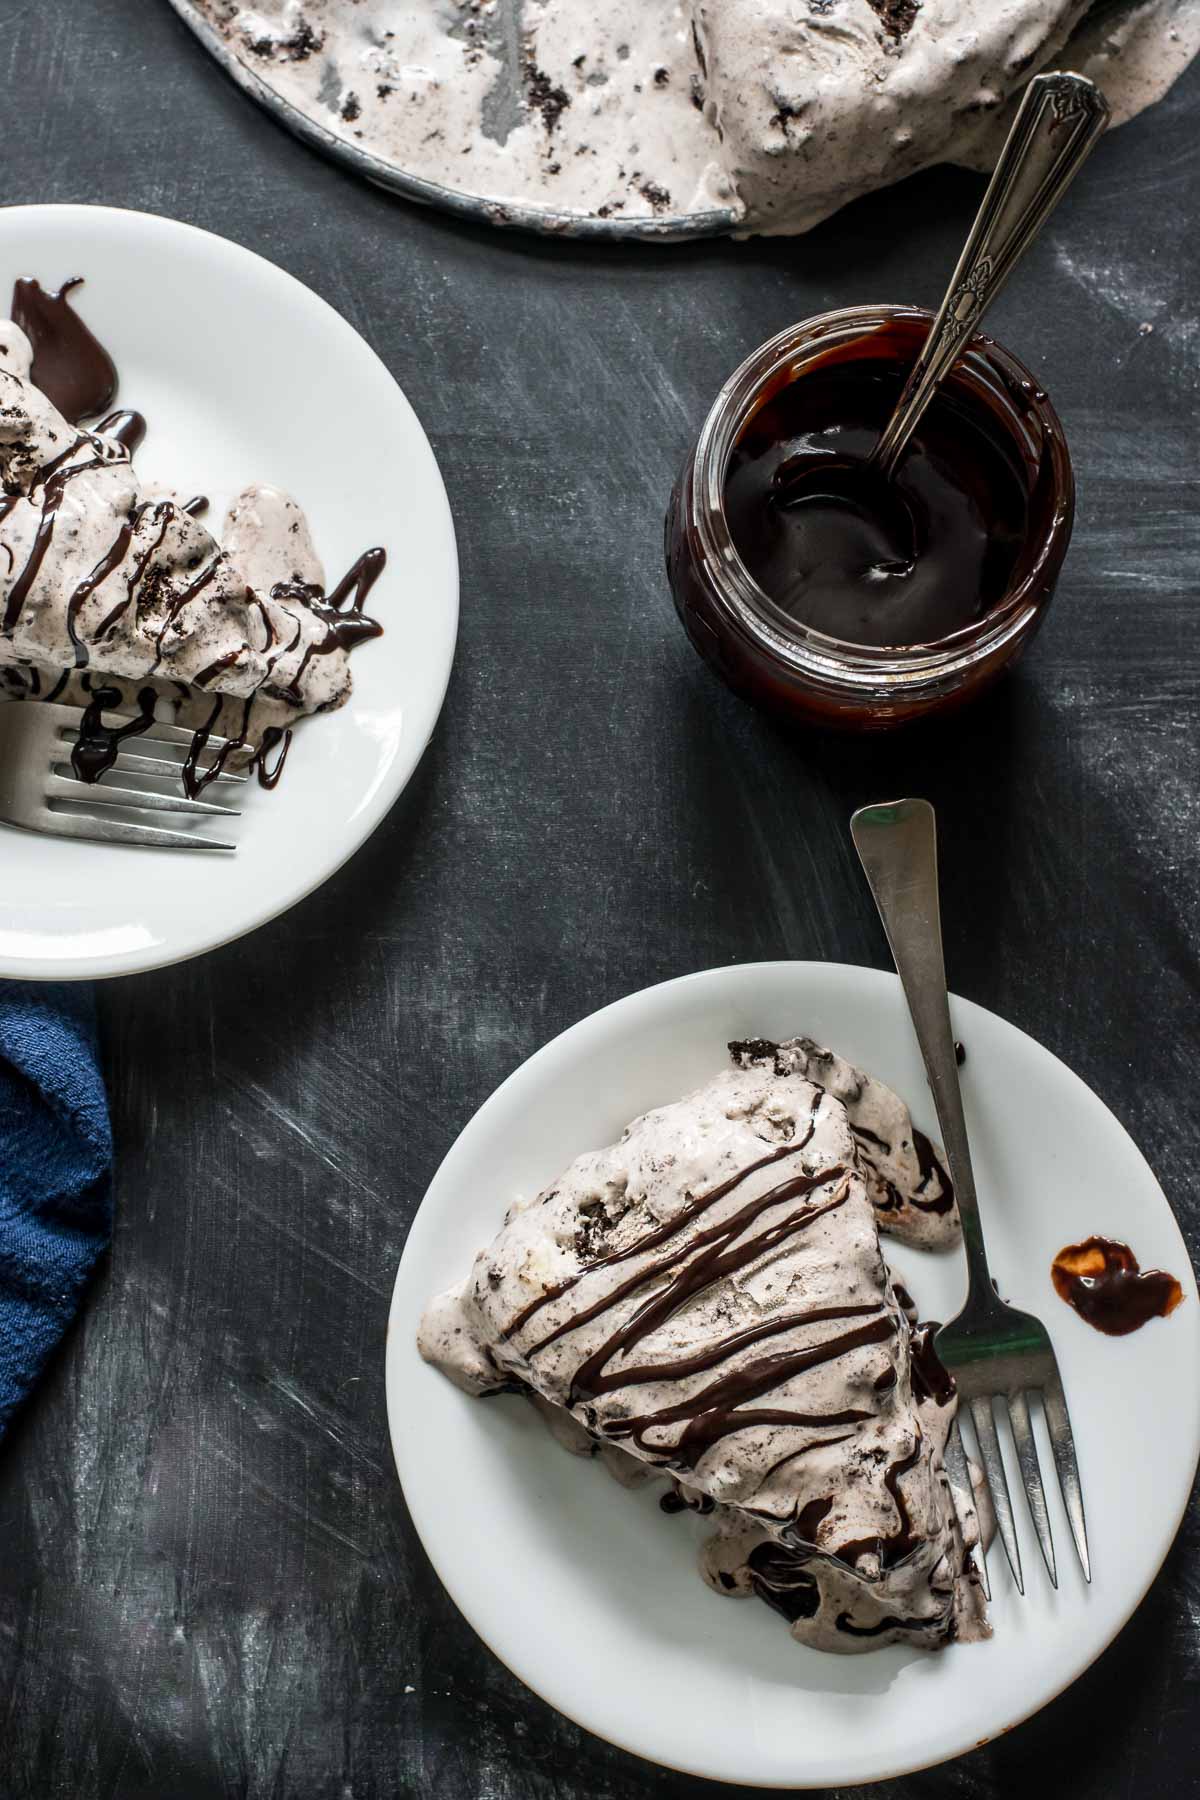 This Oreo Ice Cream Dessert takes only 10 minutes to make and is so creamy and delicious!